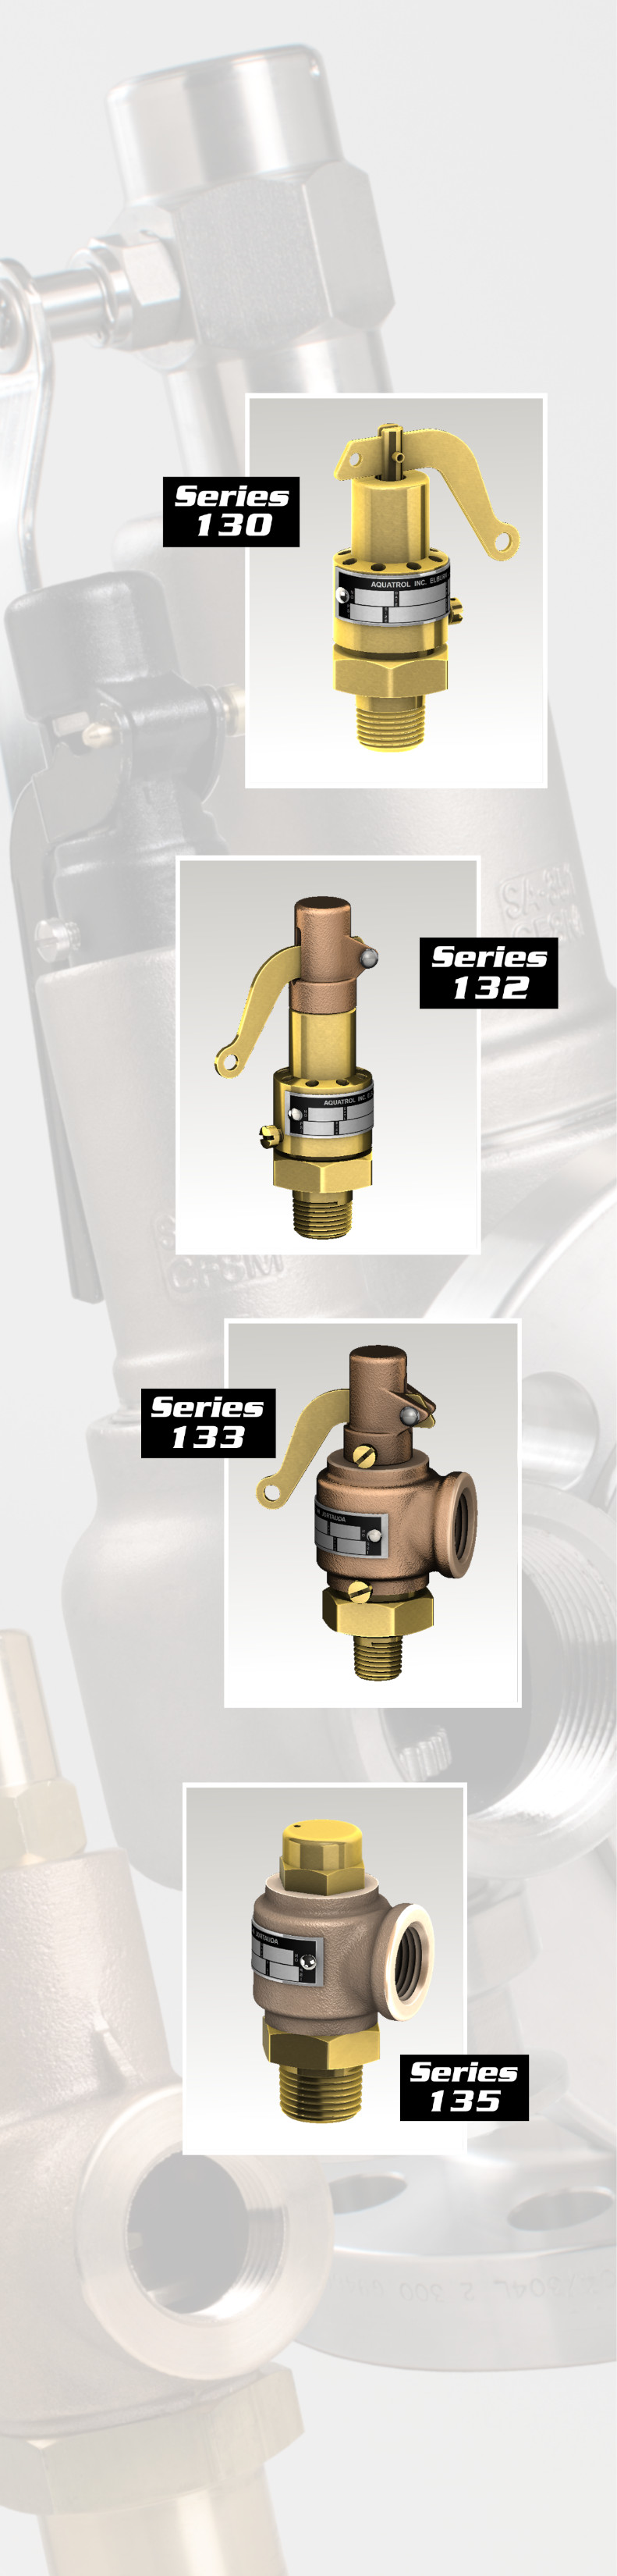 Series 130 brass safety valves with cap options